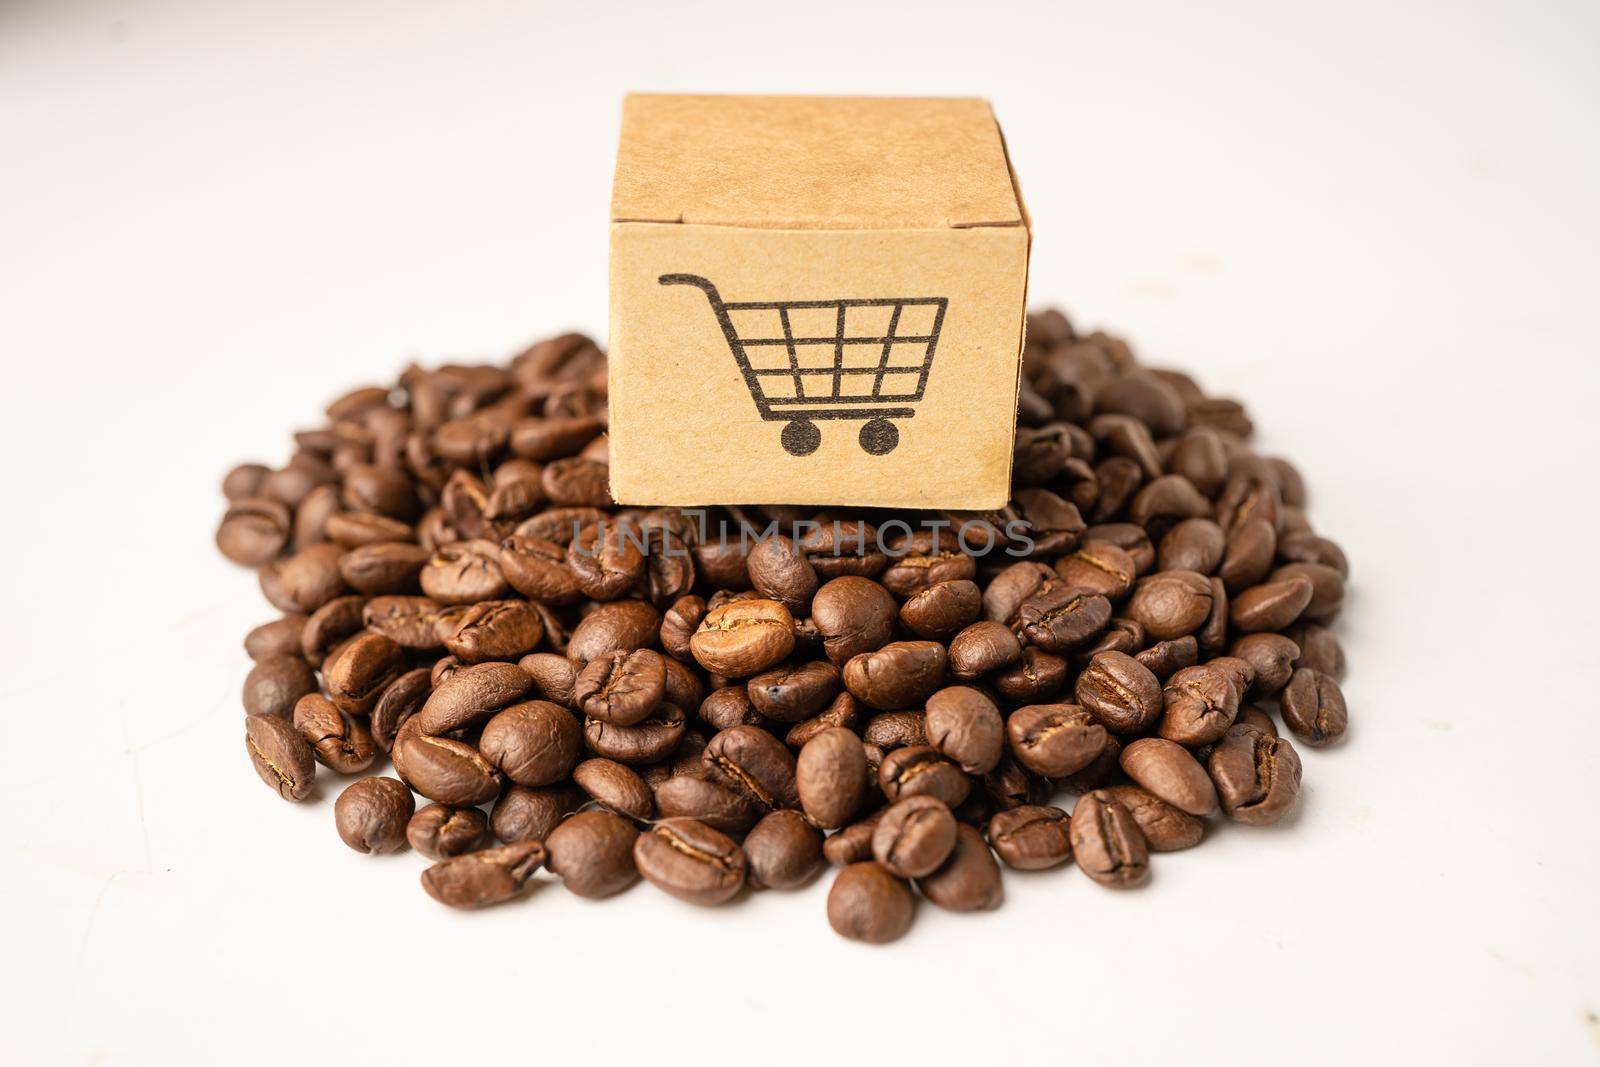 Box with shopping cart logo symbol on coffee beans, Import Export Shopping online or eCommerce delivery service store product shipping, trade, supplier concept.